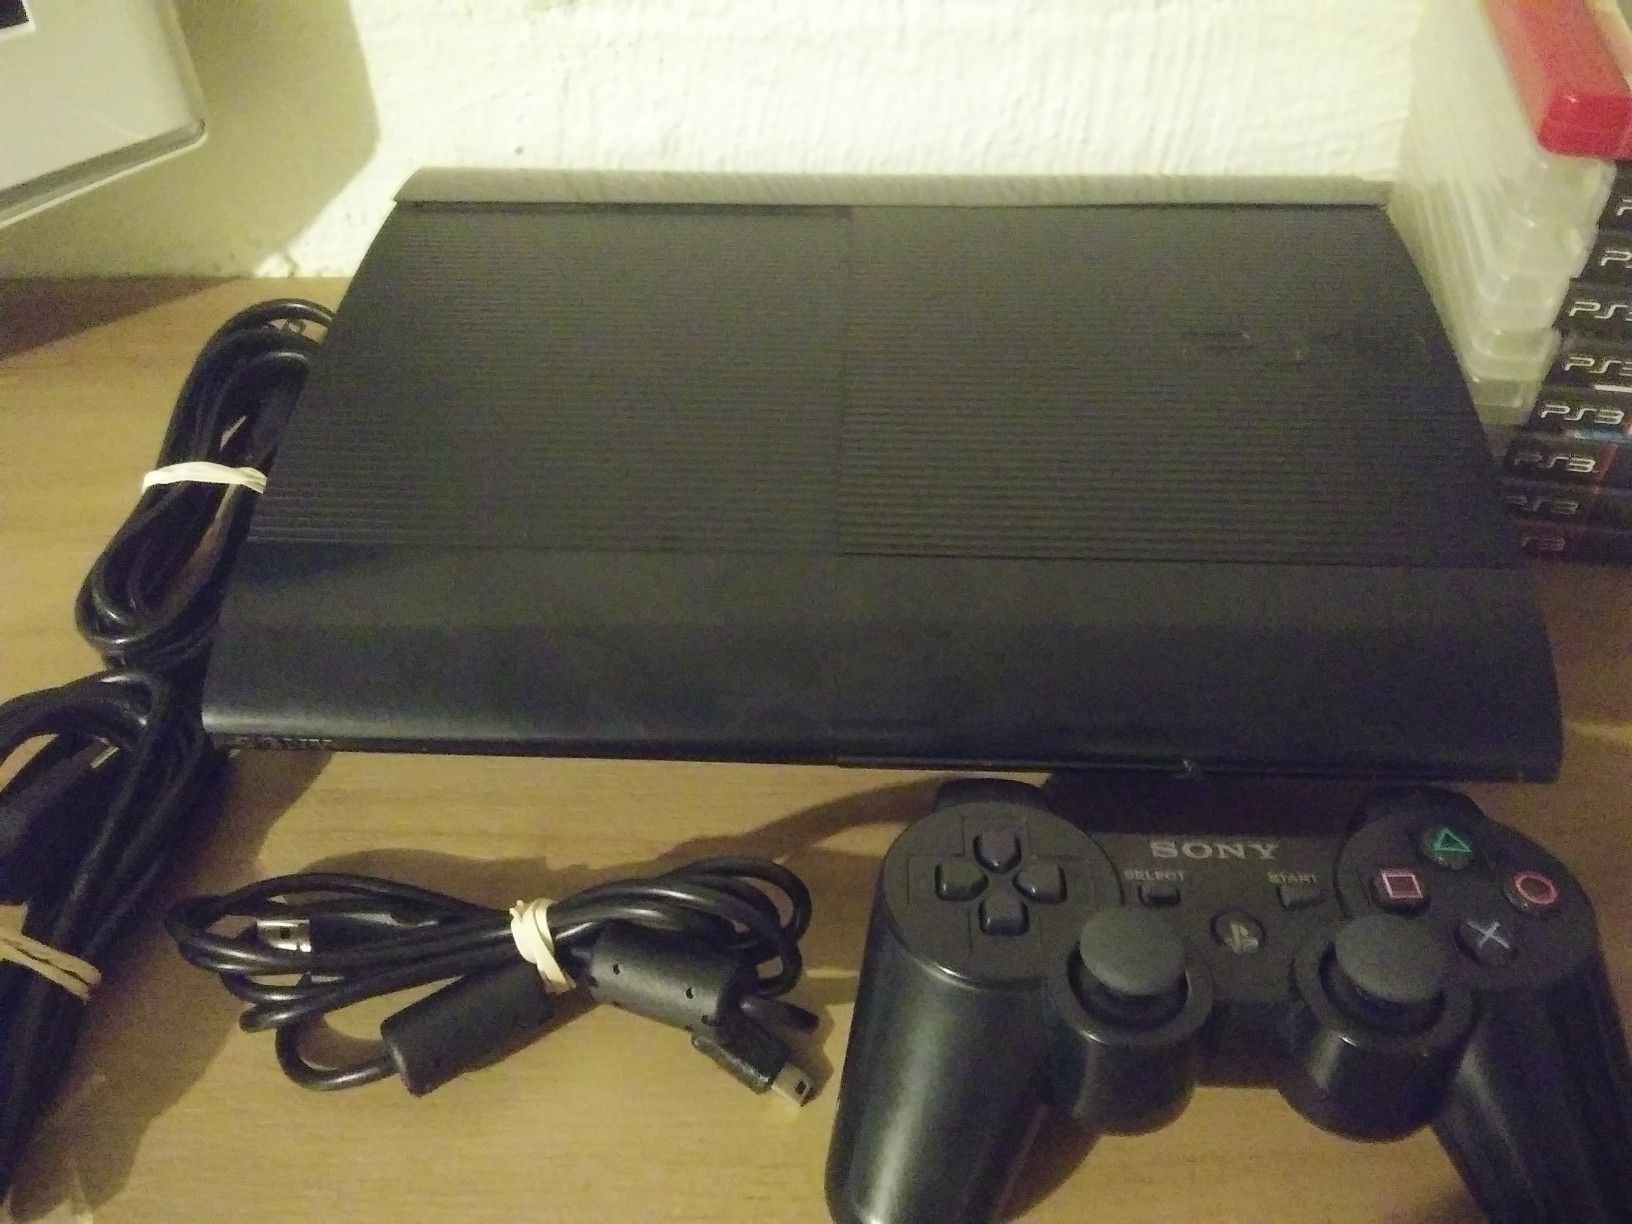 Ps3 slim with all cords and 9 games.